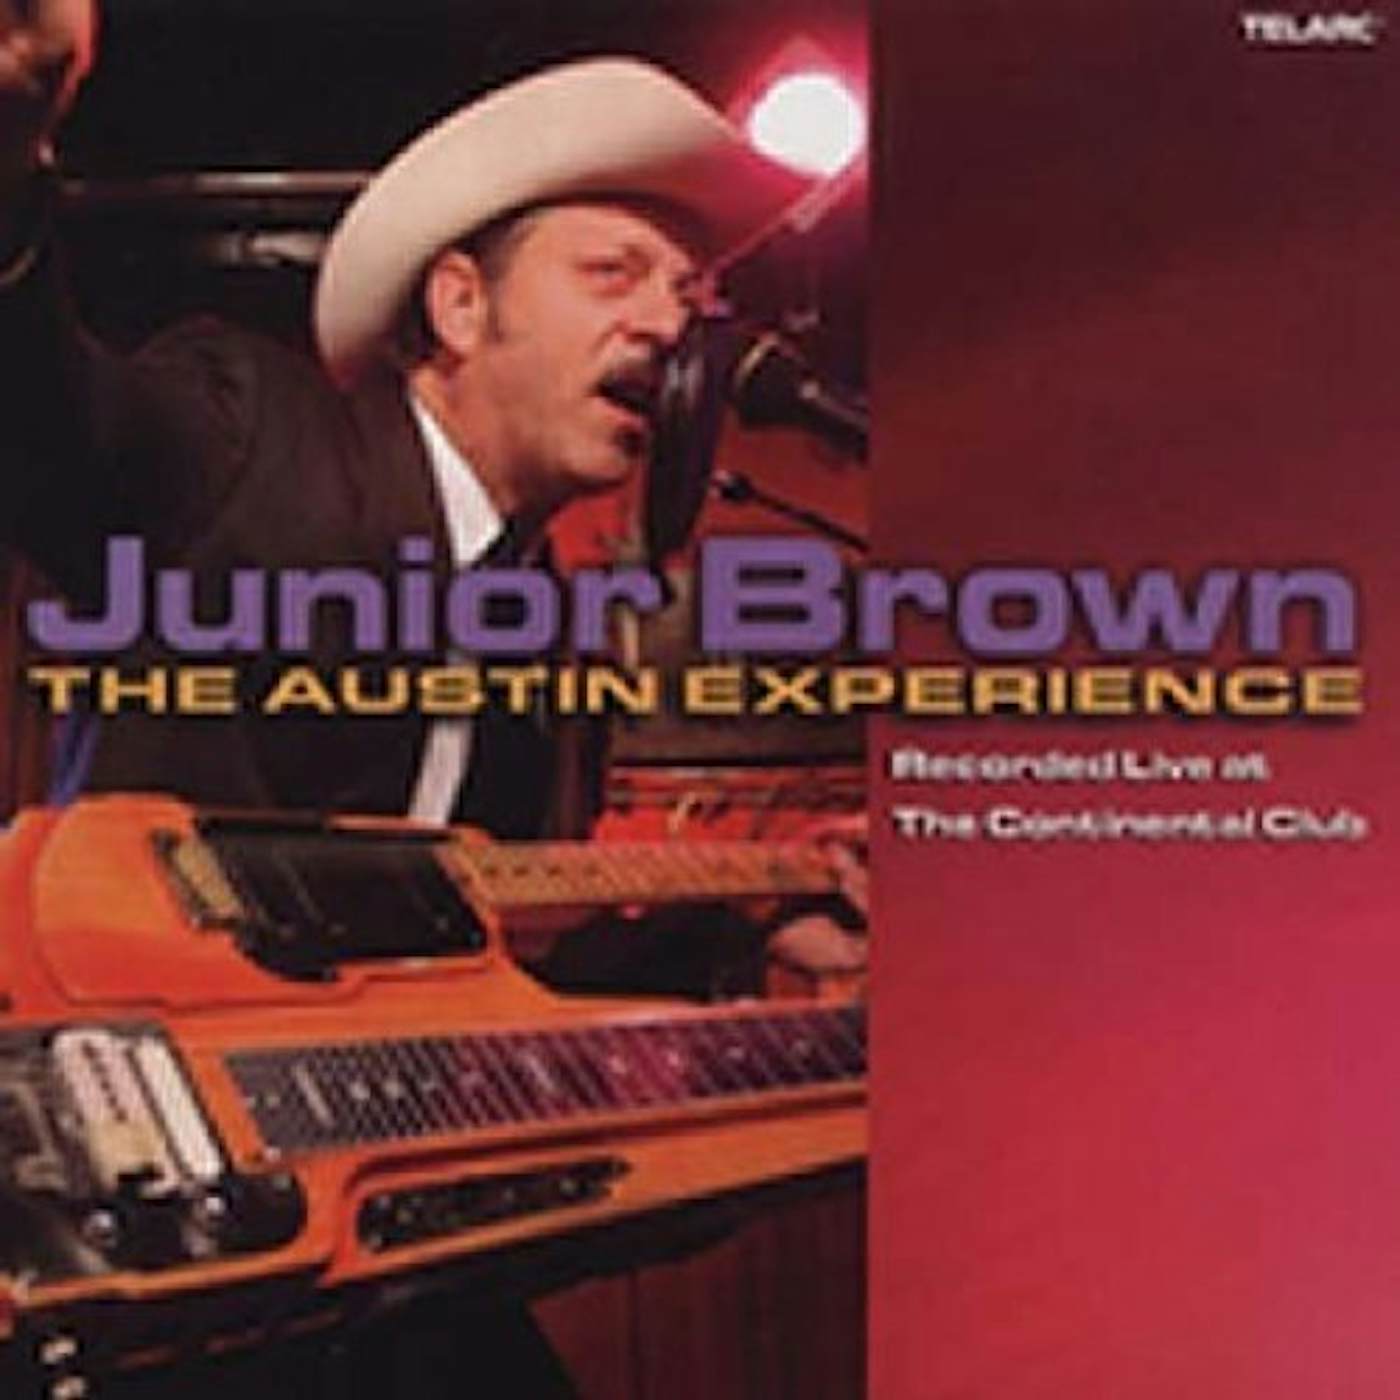 Junior Brown LIVE AT THE CONTINENTAL CLUB: AUSTIN EXPERIENCE CD